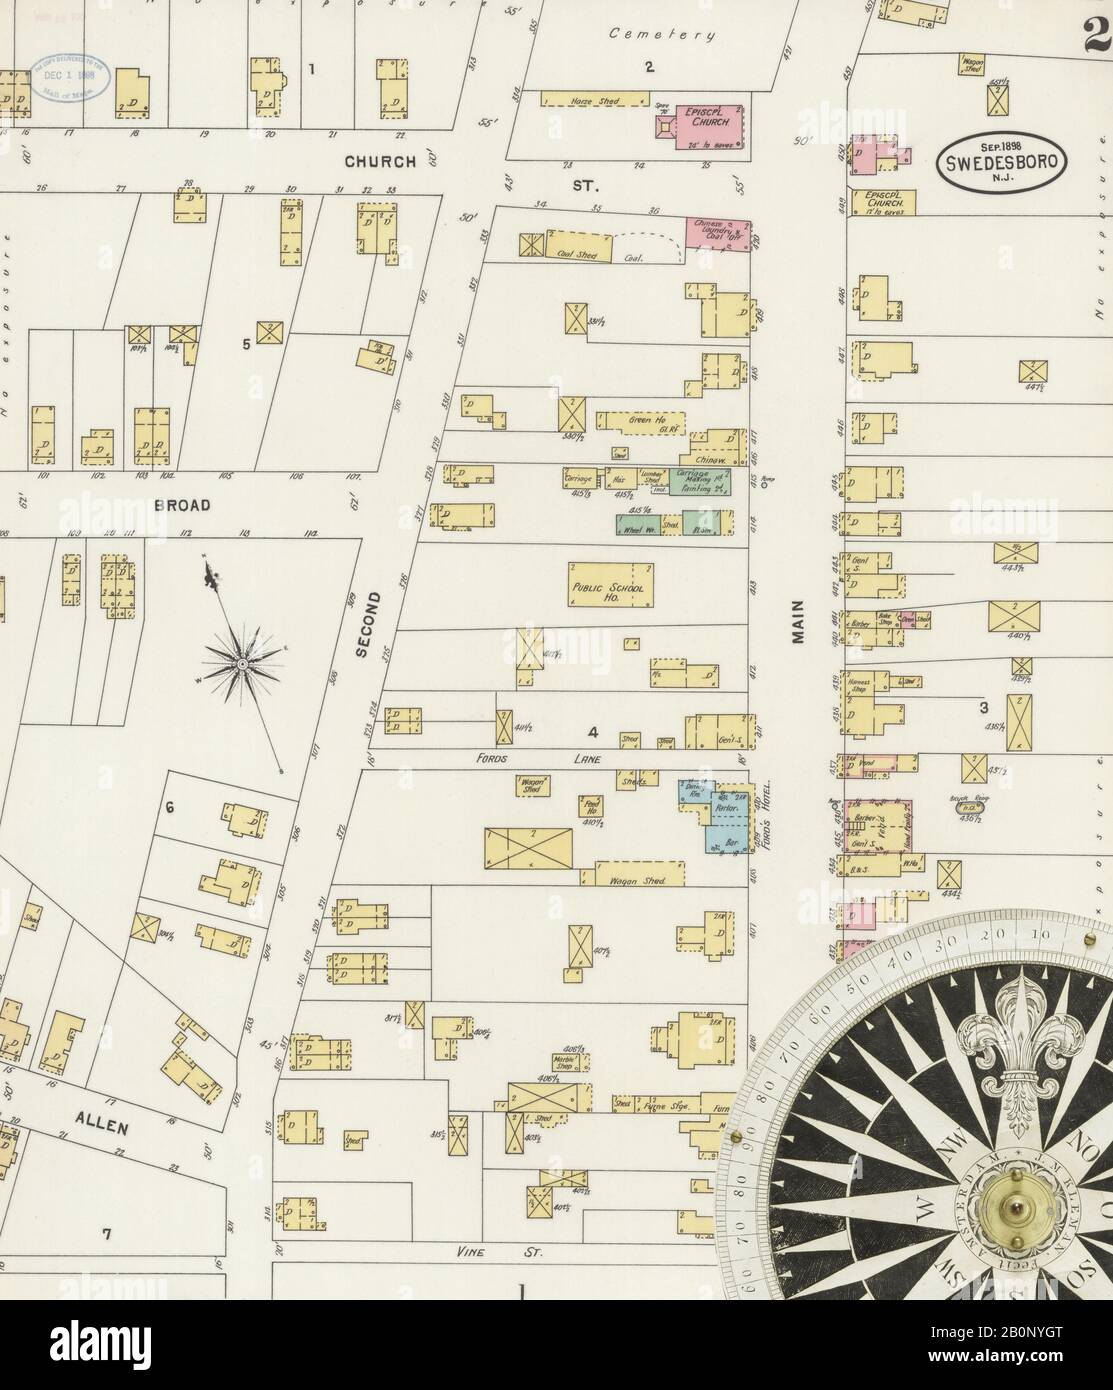 Image 2 of Sanborn Fire Insurance Map from Swedesboro, Gloucester County, New Jersey. Sep 1898. 2 Sheet(s), America, street map with a Nineteenth Century compass Stock Photo